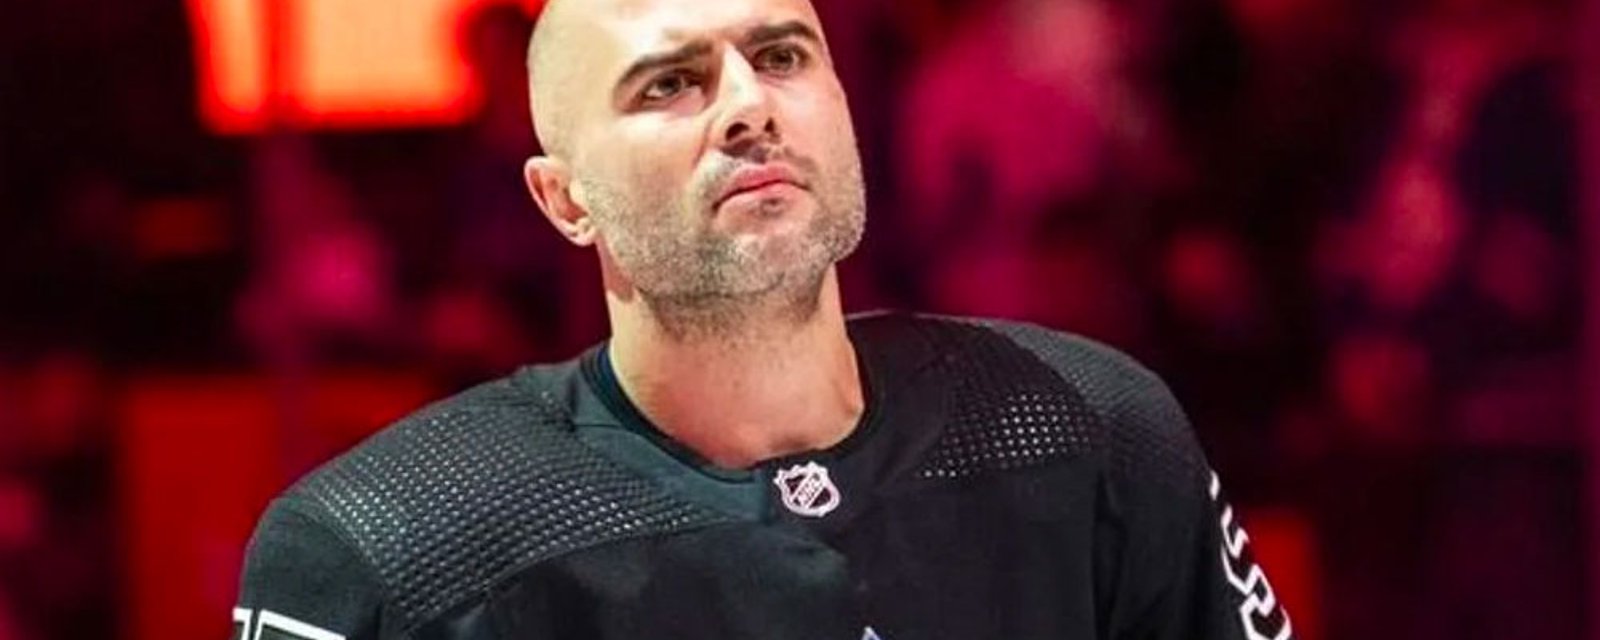 Report: A new update on Mark Giordano's condition